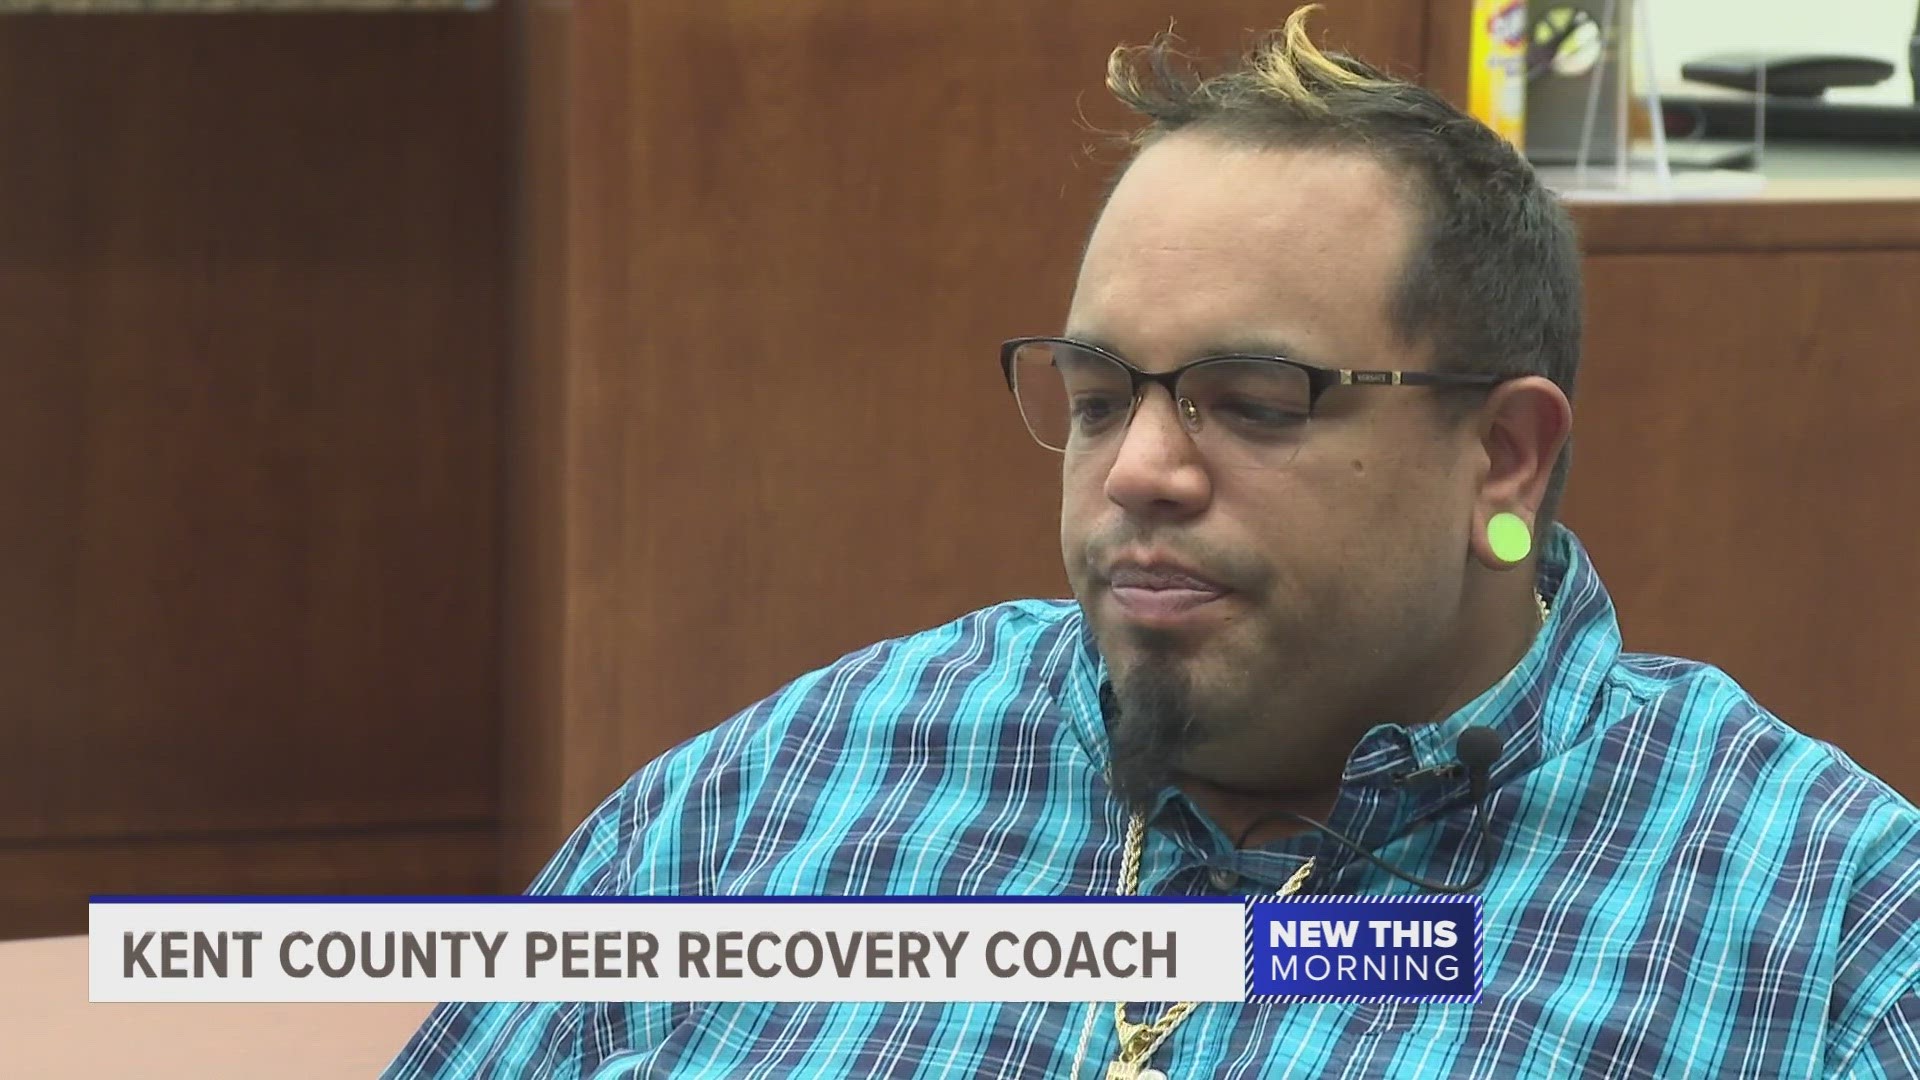 Jeffery Carter spent years battling substance abuse and mental health issues. Now, he's helping others on the path to recovery.